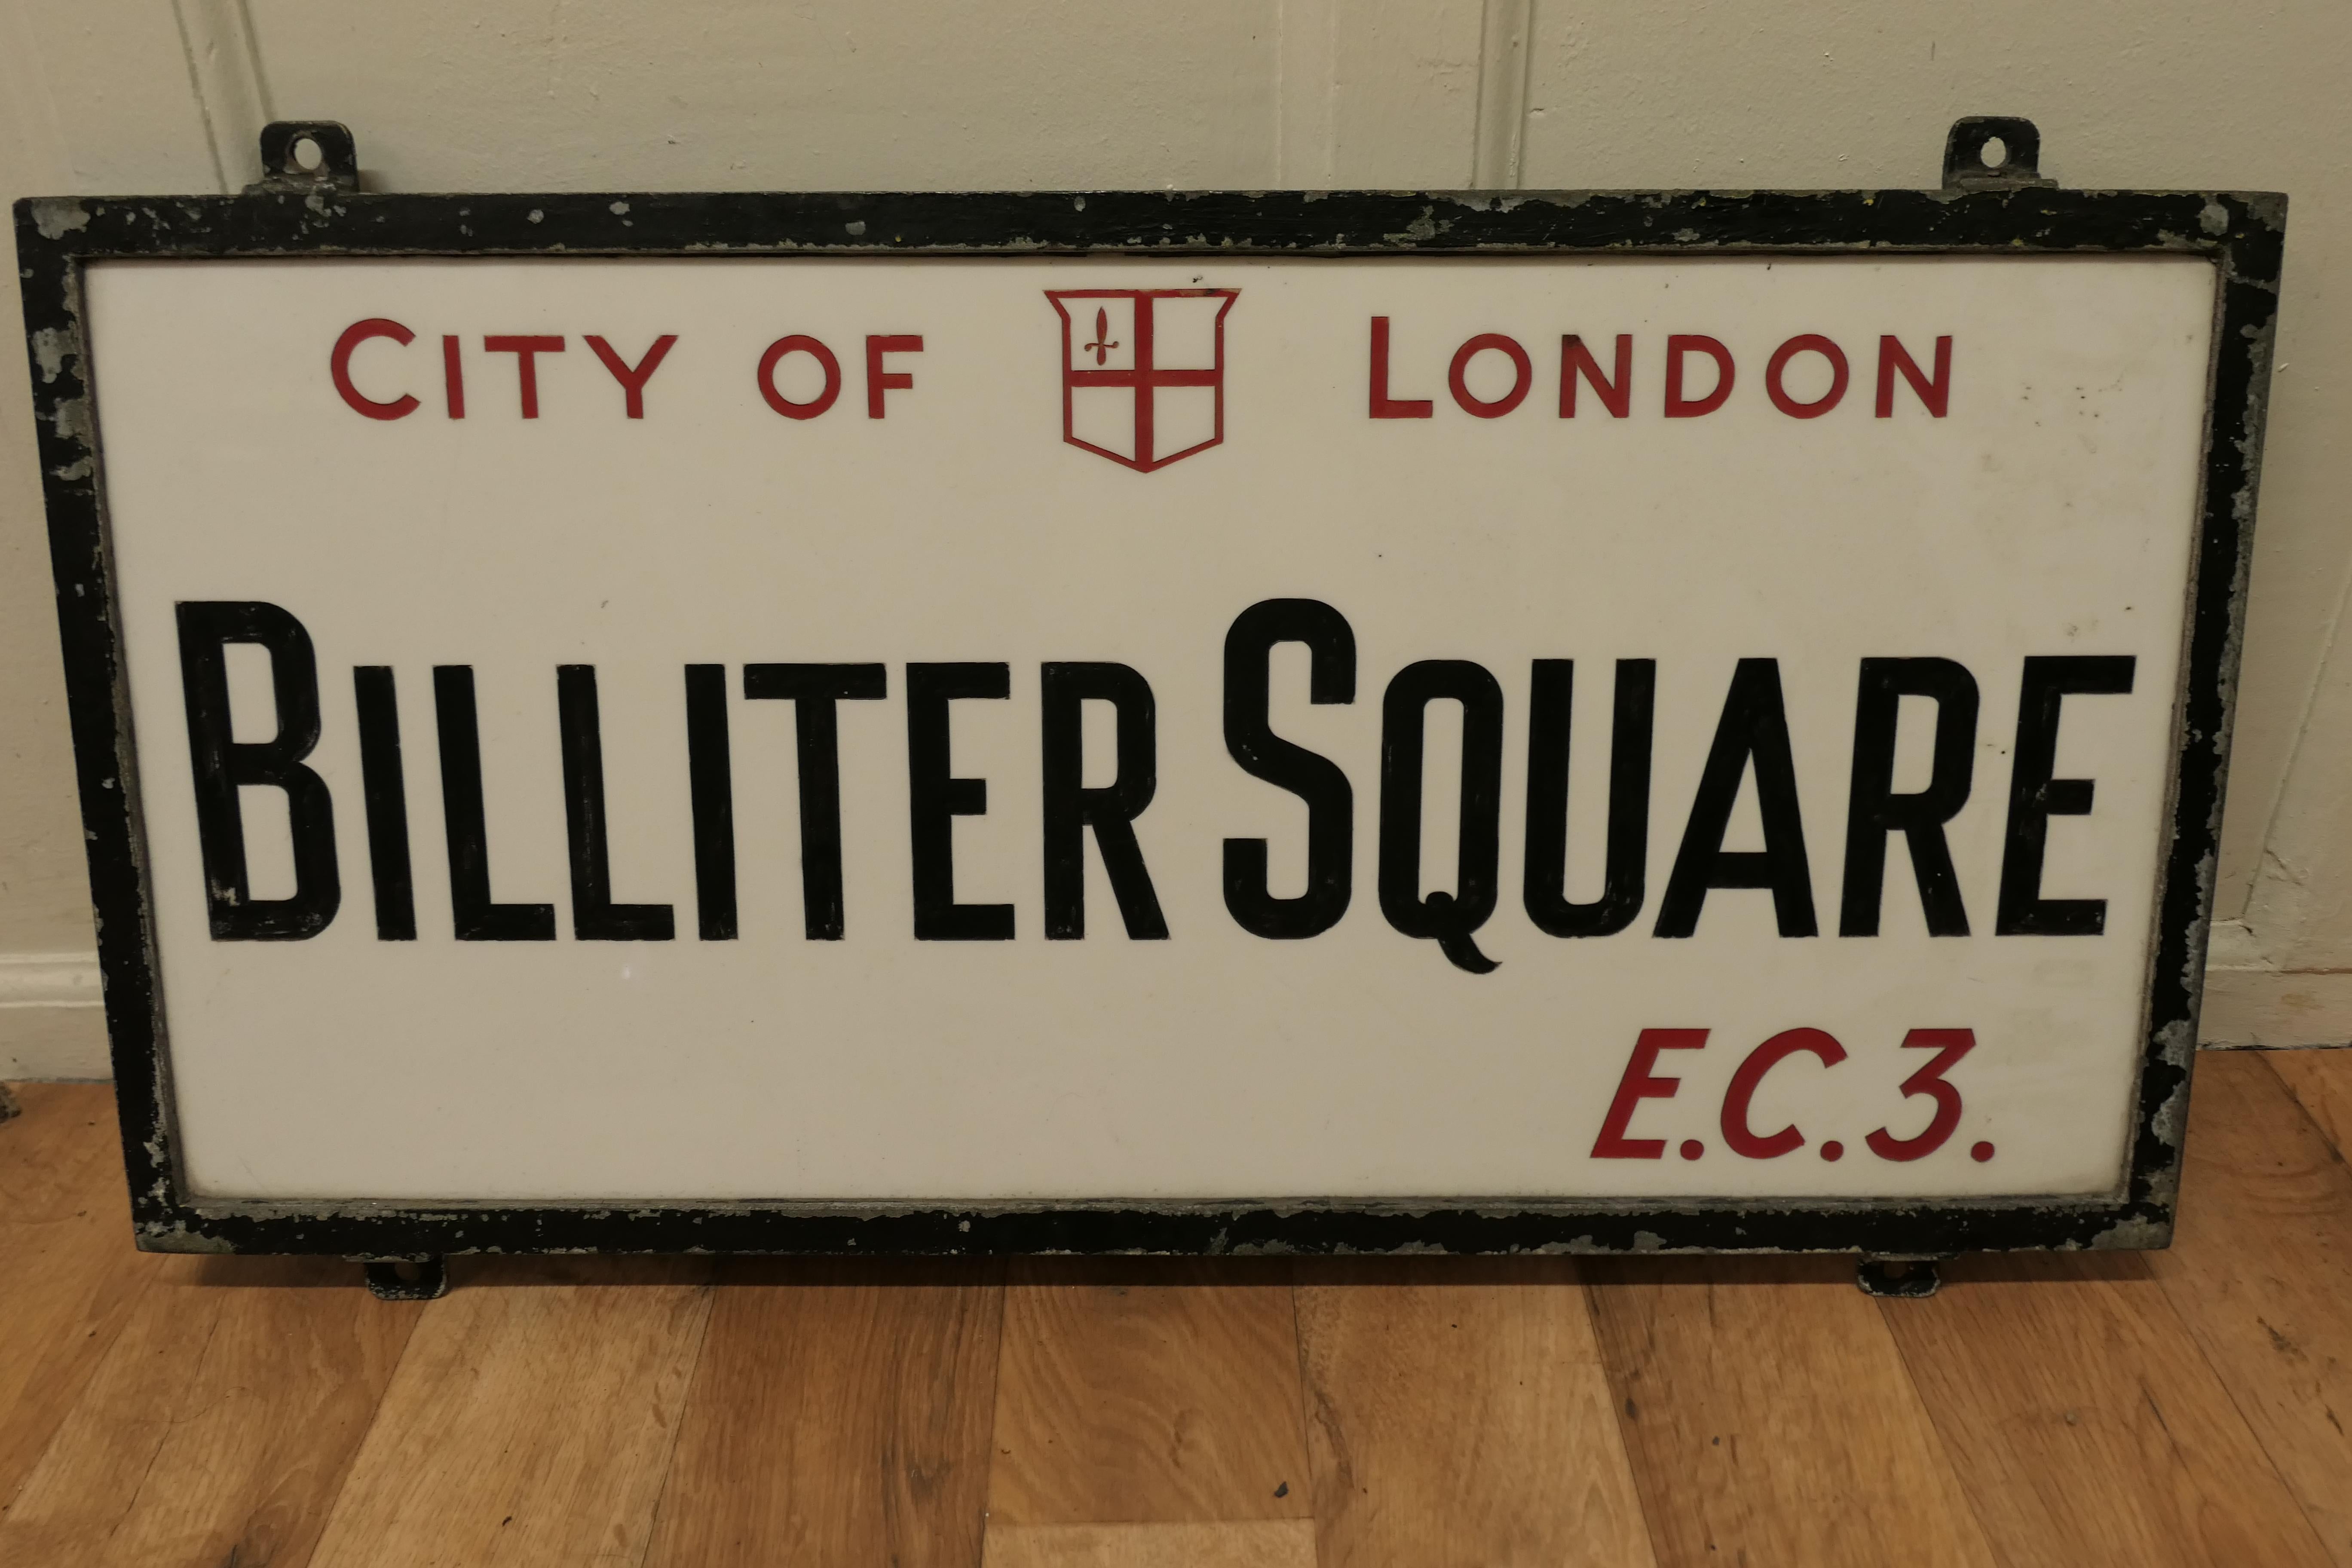 City of London glass Edwardian street sign, Bilter Square E.C.3

This is a City of London Street sign, it is set in its cast Iron Frame, it is made in etched Vitrolite glass, the City Of London and E.C.3 are impressed in red and the other